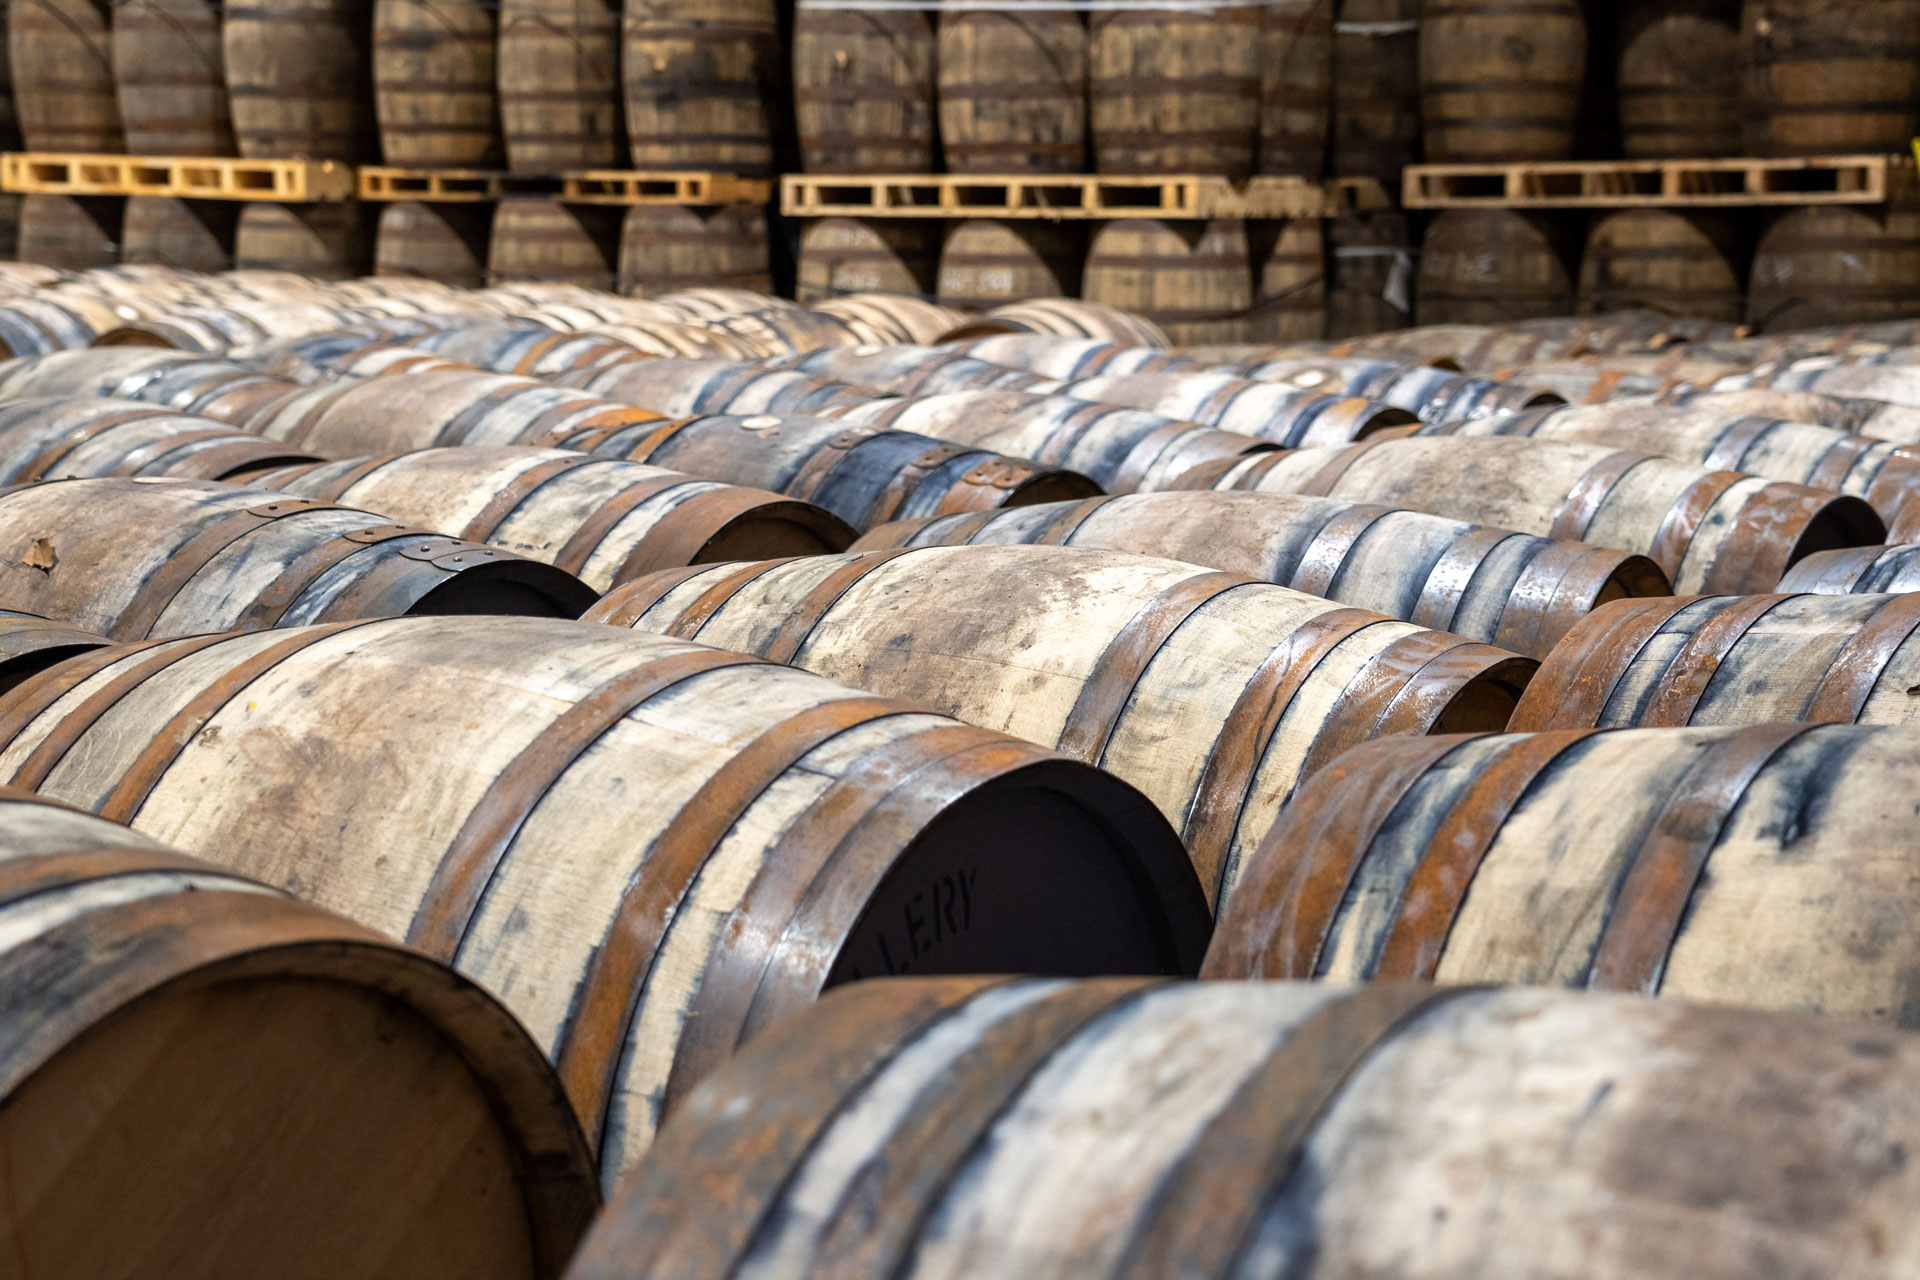 Vintage Acquisitions: The Art of Investing in Scotch Whisky Casks